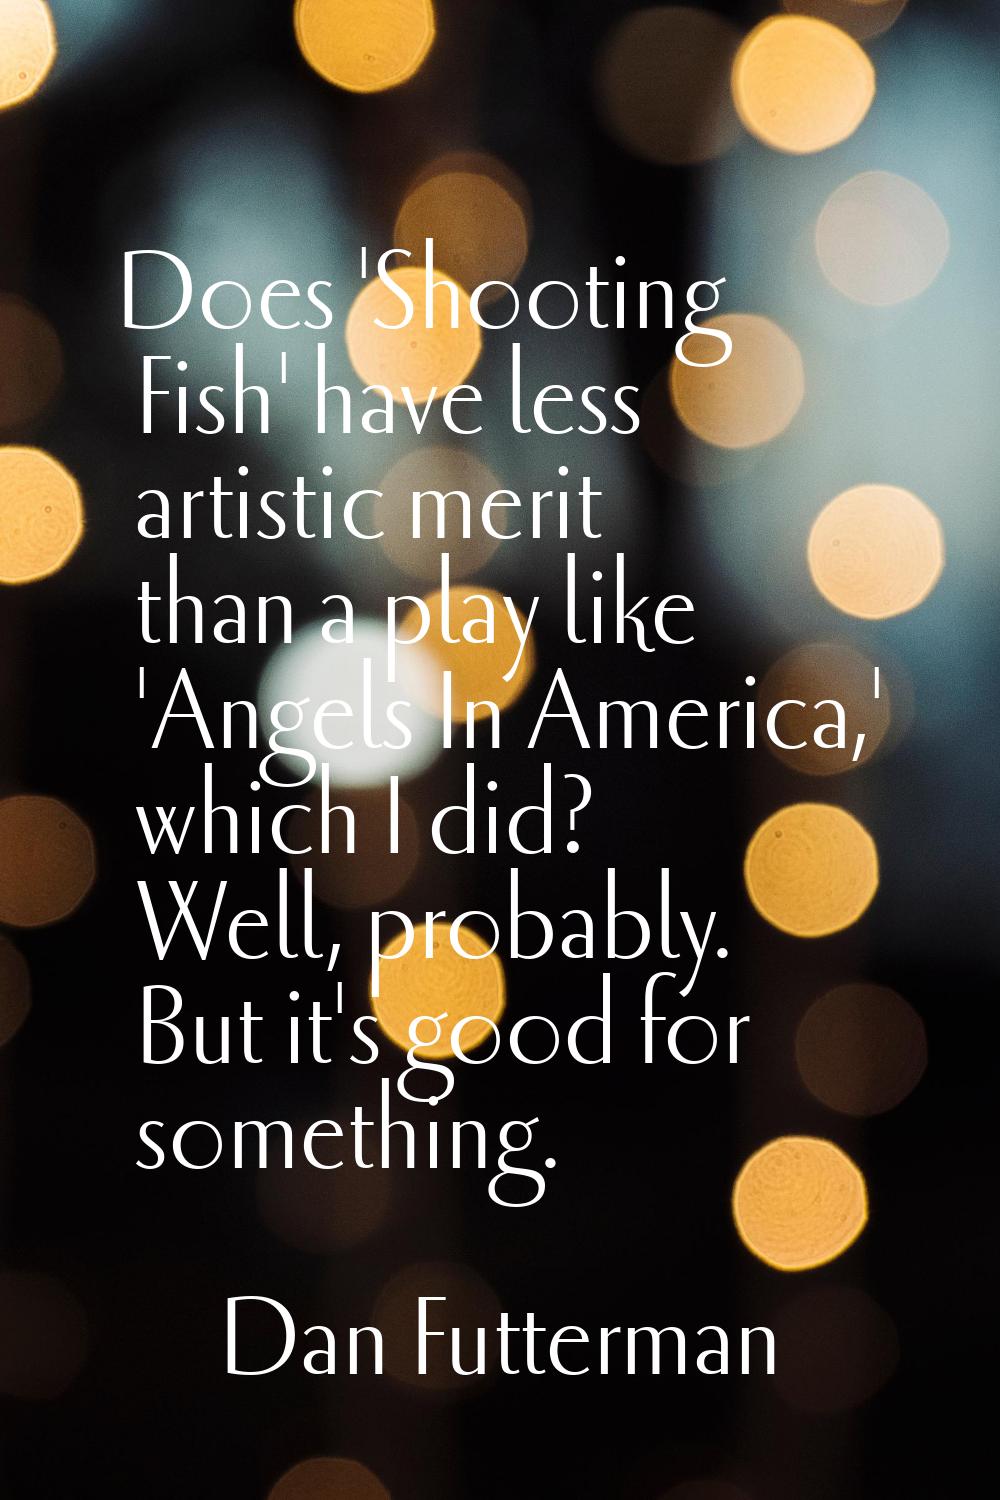 Does 'Shooting Fish' have less artistic merit than a play like 'Angels In America,' which I did? We